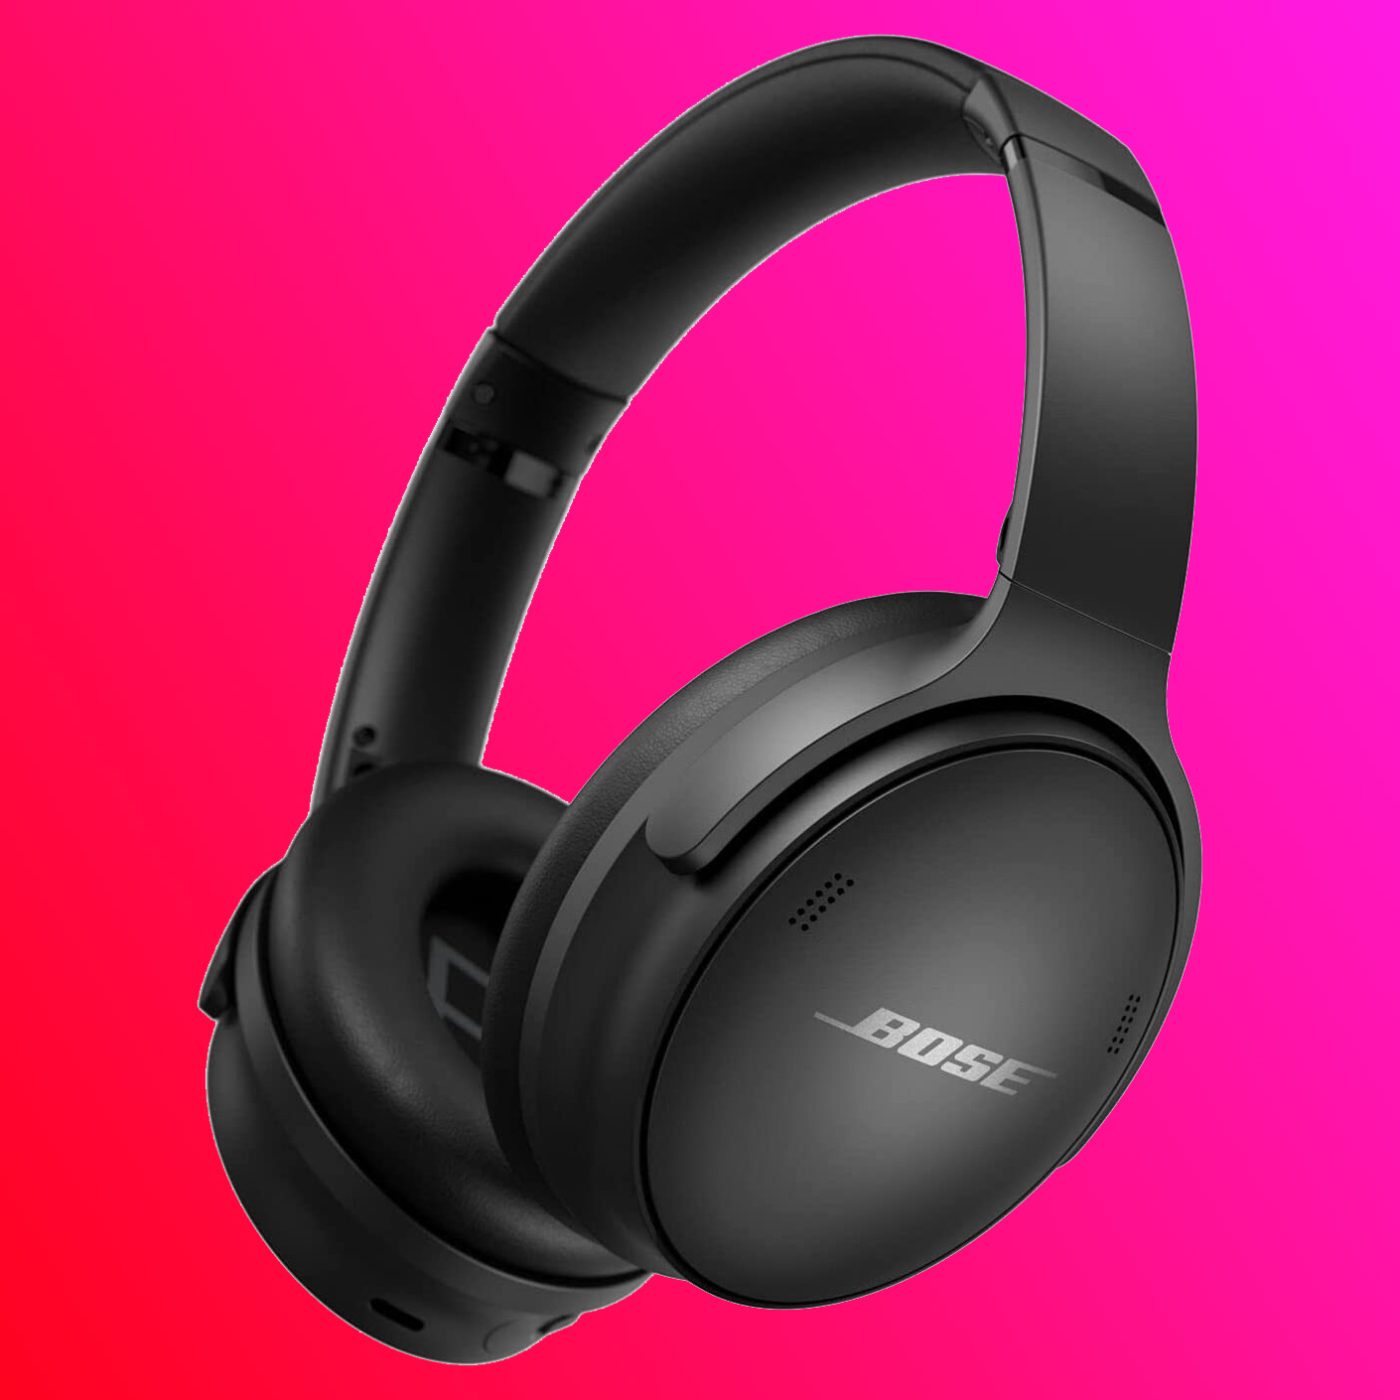 Bose deals: Save on Bose QC45 headphones, Bose speakers, more